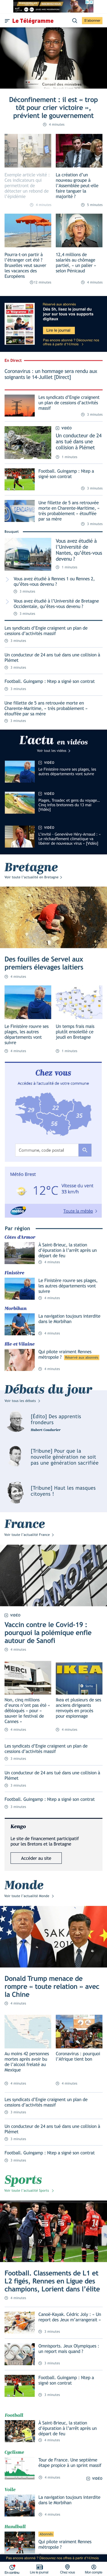 Newspaper homepage from Le Télégramme